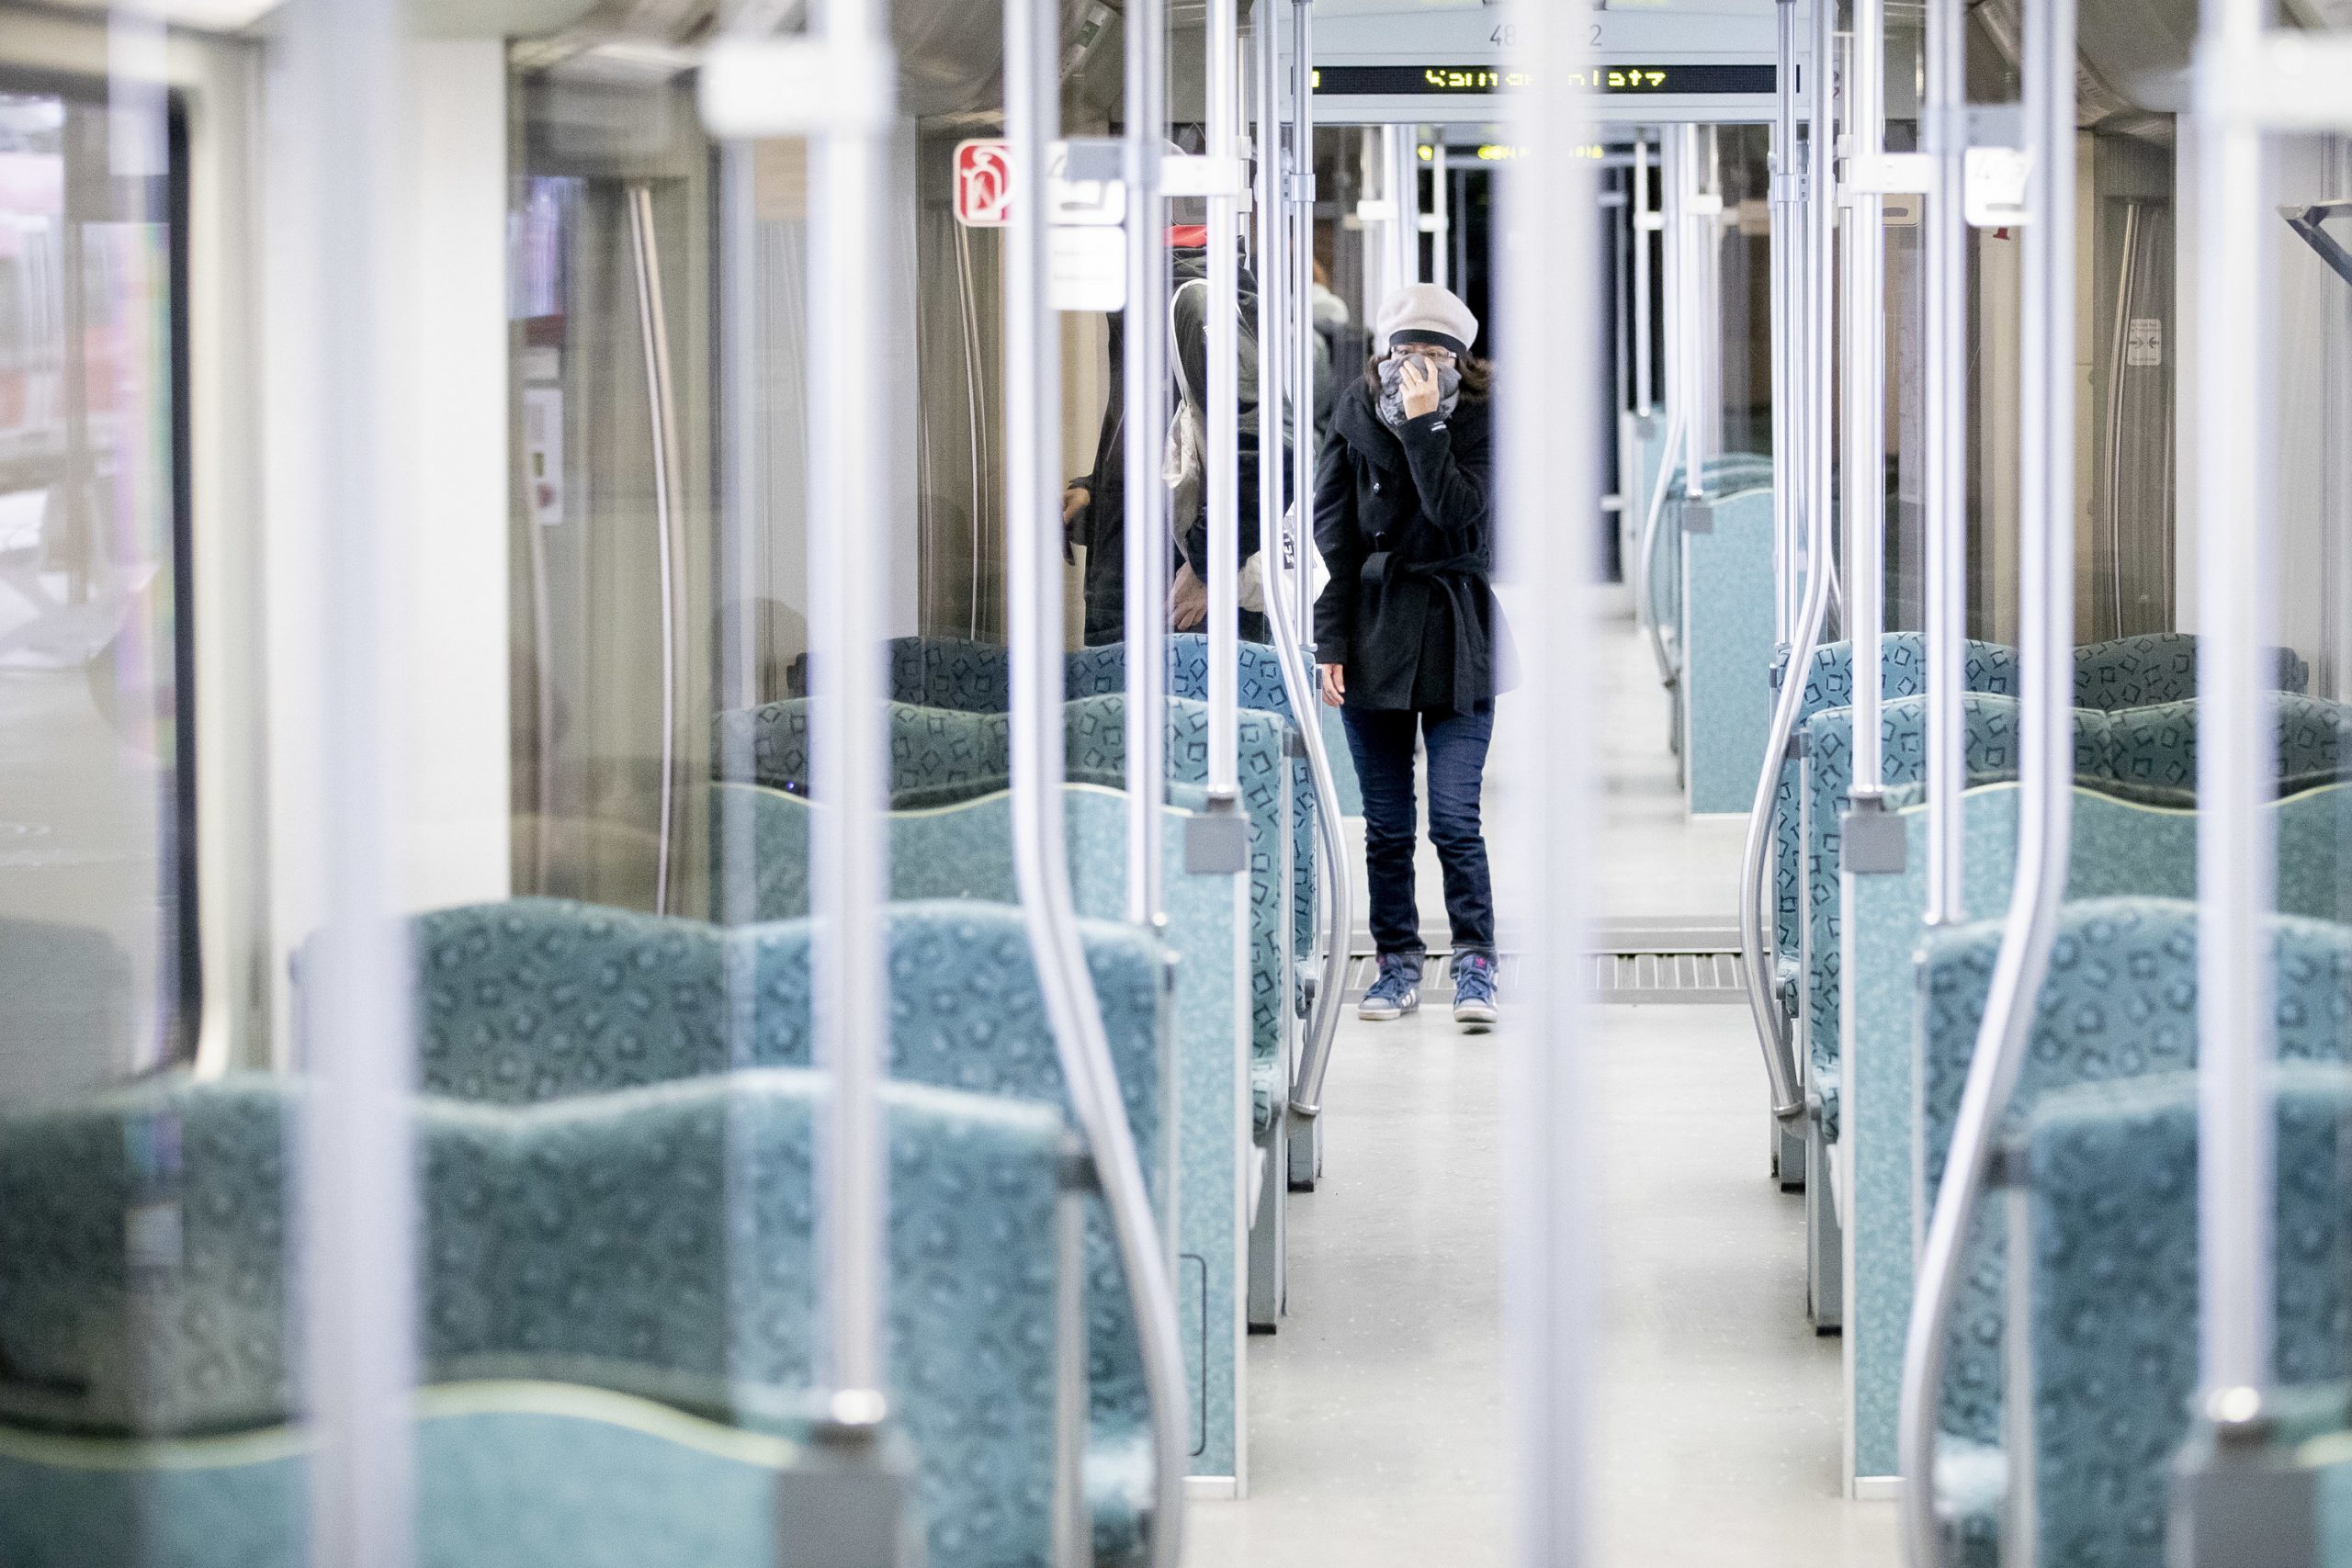 20 March 2020, Berlin: A woman holds her scarf in front of her mouth as she walks on an almost deserted suburban train. Germany has introduced drastic restrictions on public life and strict travel bans as part of efforts to curb the spread of the Coronavirus (SARS-CoV-2). Photo: Christoph Soeder/dpa